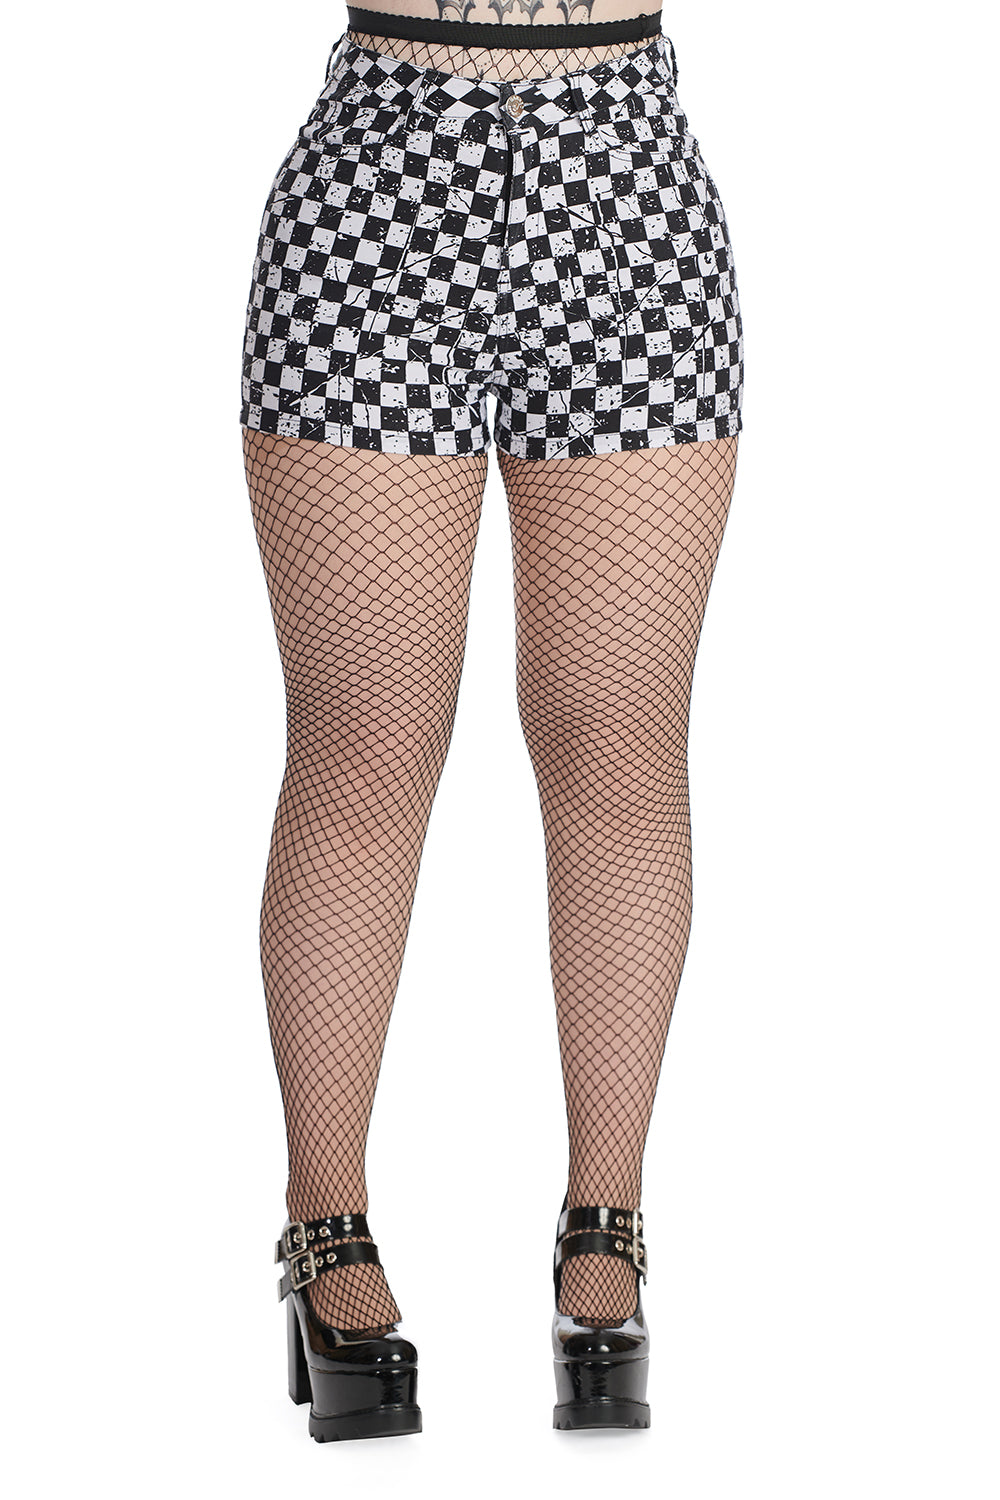 Shorts Checkers [ST81069]